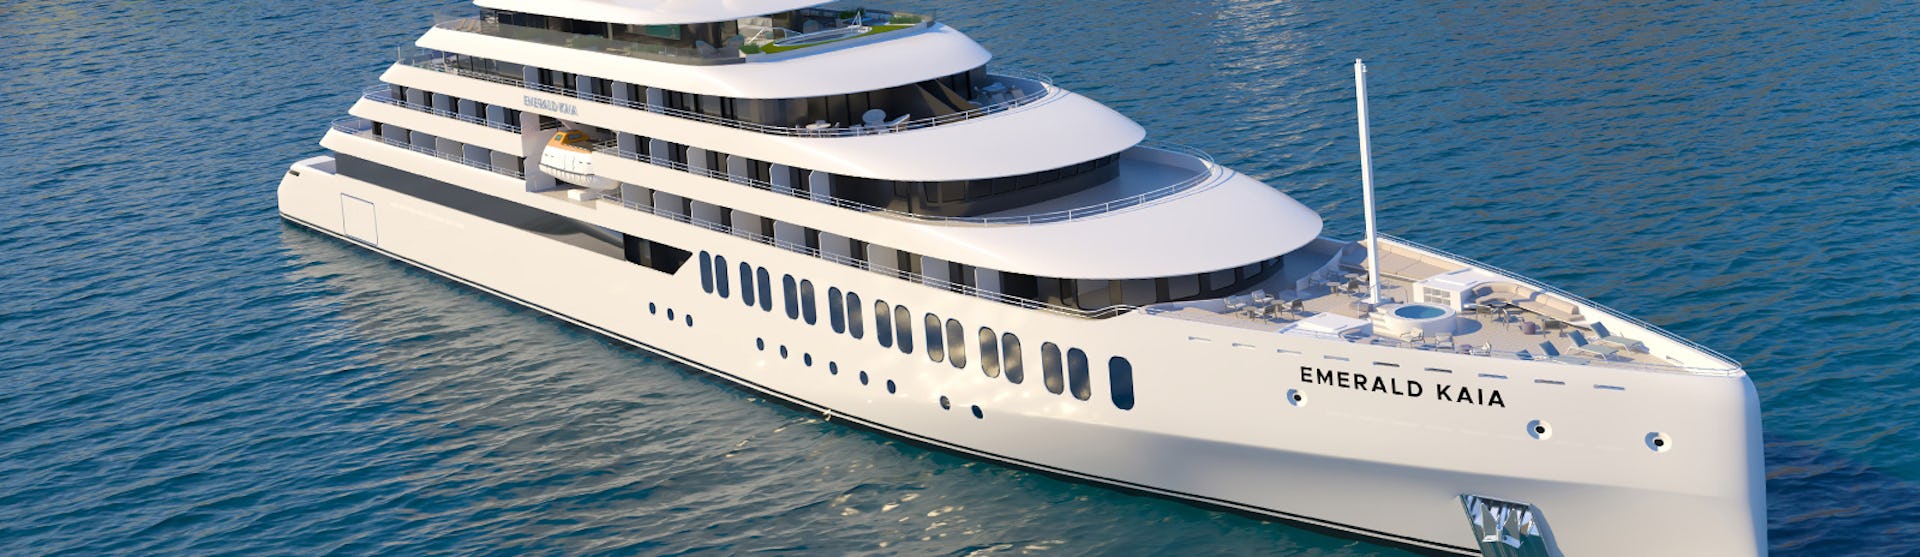 Emerald Kaia, the newest ship from Emerald Yacht Cruises